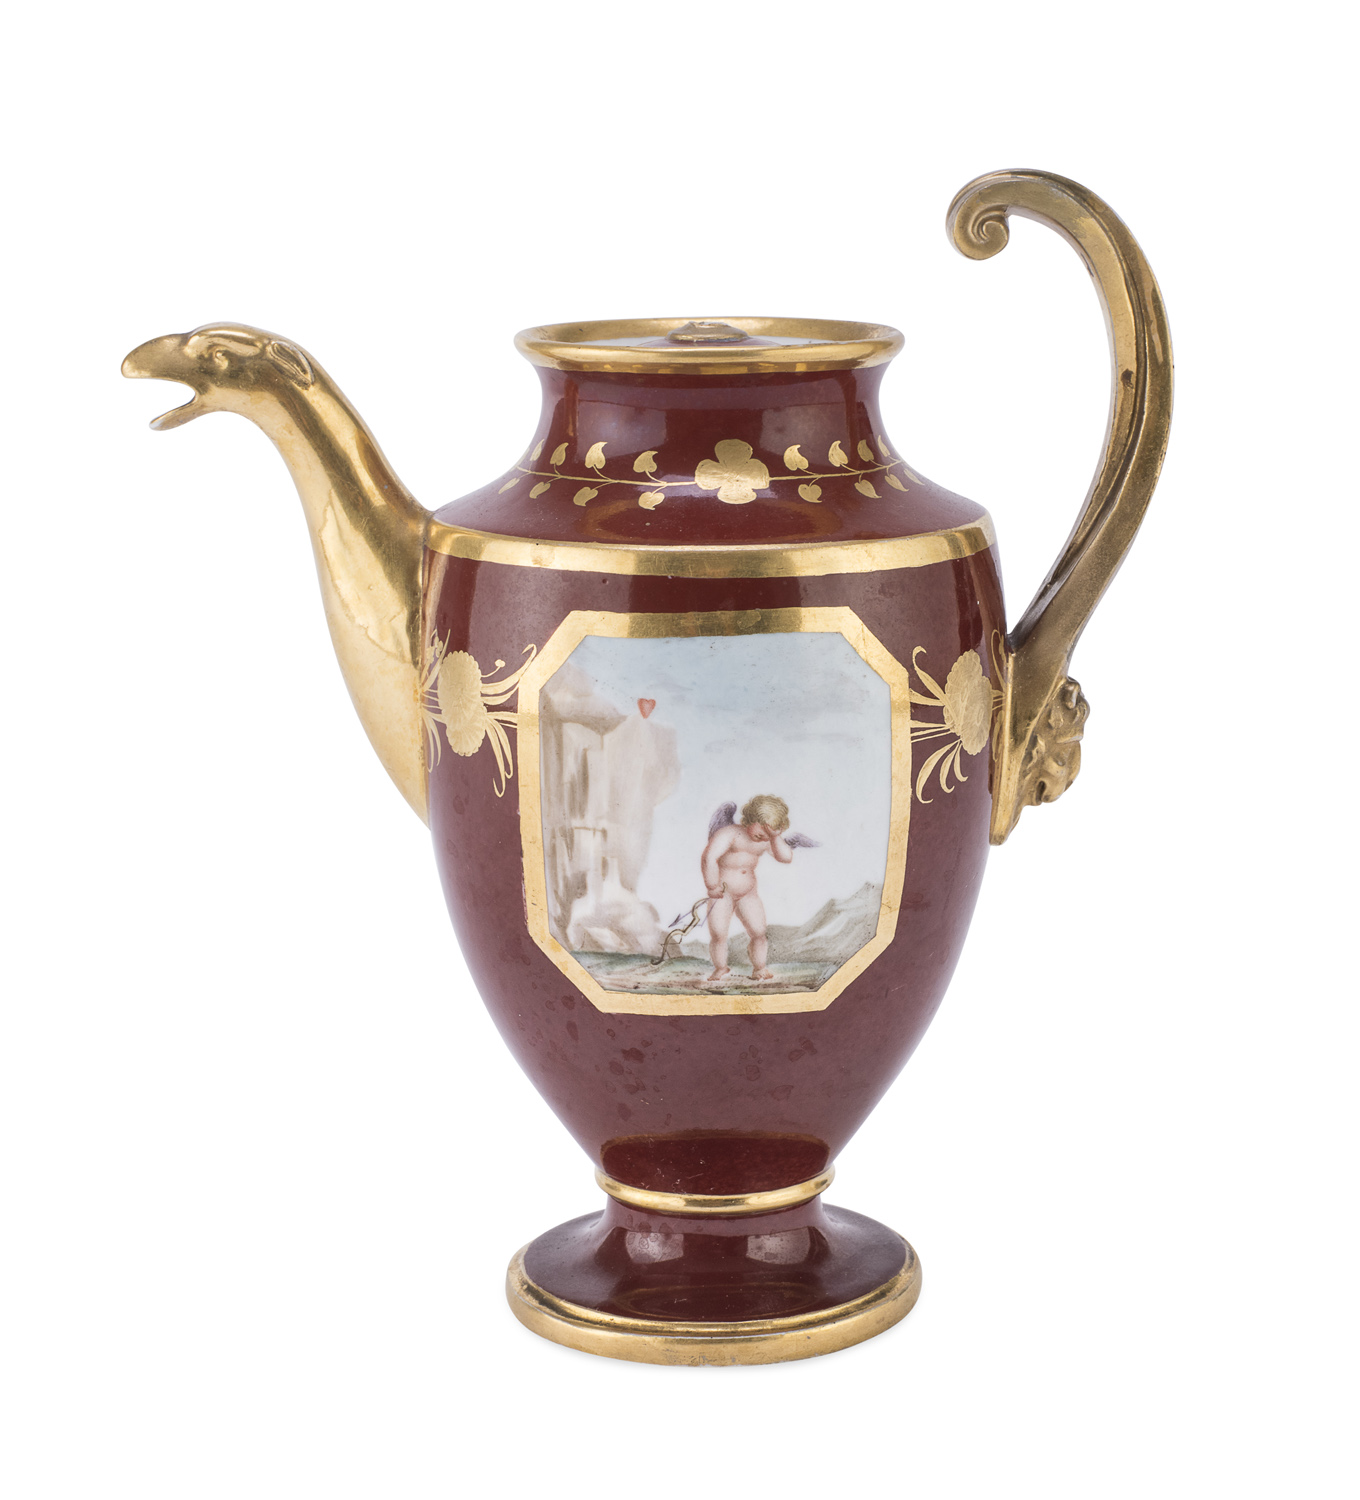 COCOA POT IN PORCELAIN PROBABLY RUSSIA 19TH CENTURY